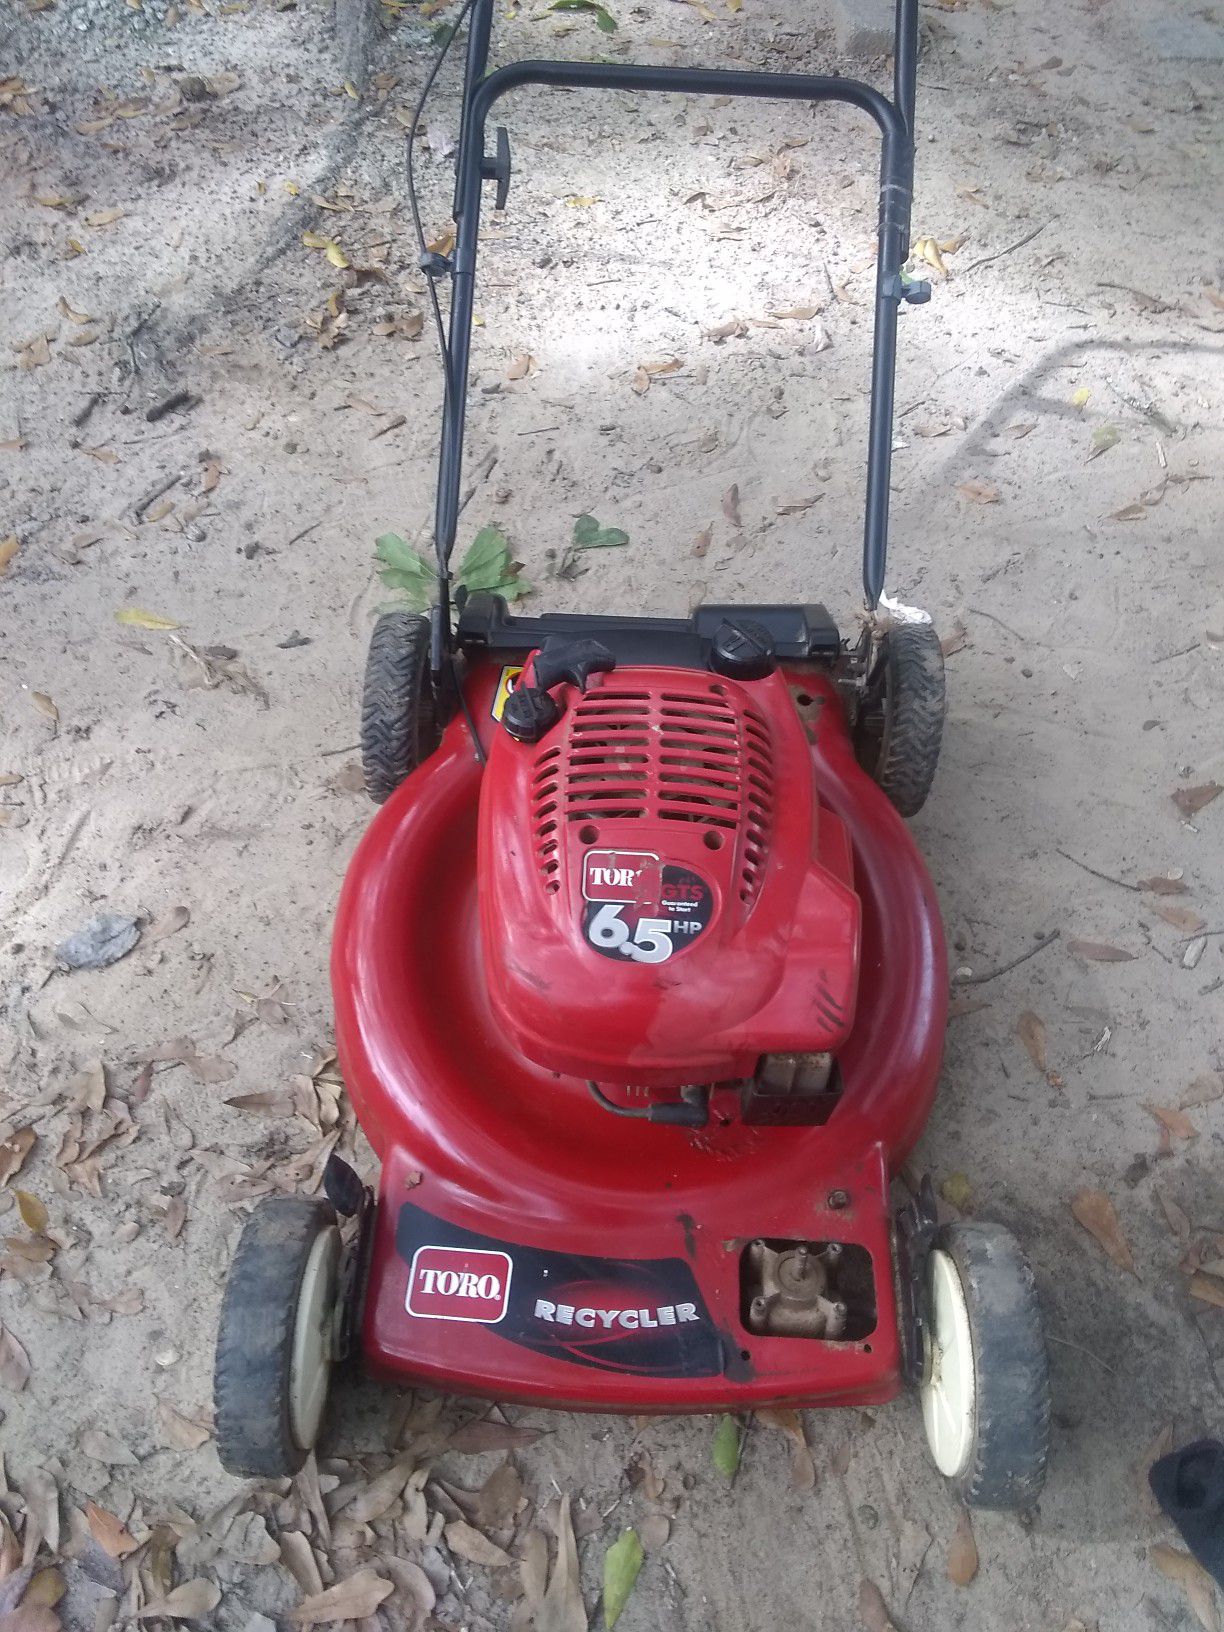 I have My Personal TORO GTS Recycler.675 Hp Lawnmower Runs And Cuts Great $45.00 come pick it up Today